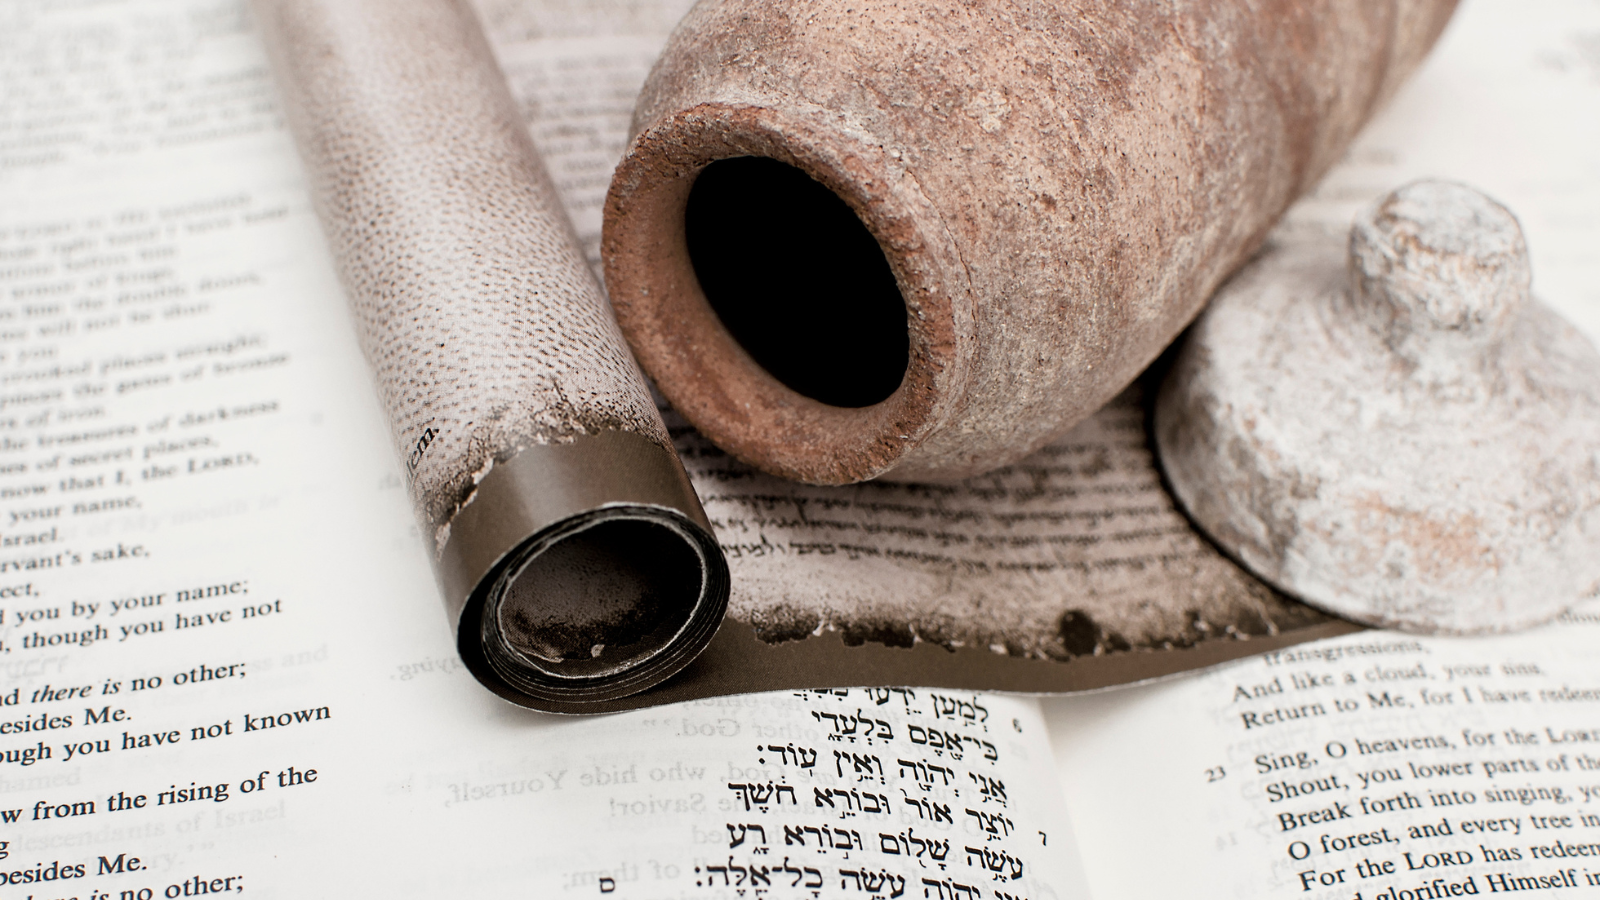 The dead sea scrolls laid on an open bible.